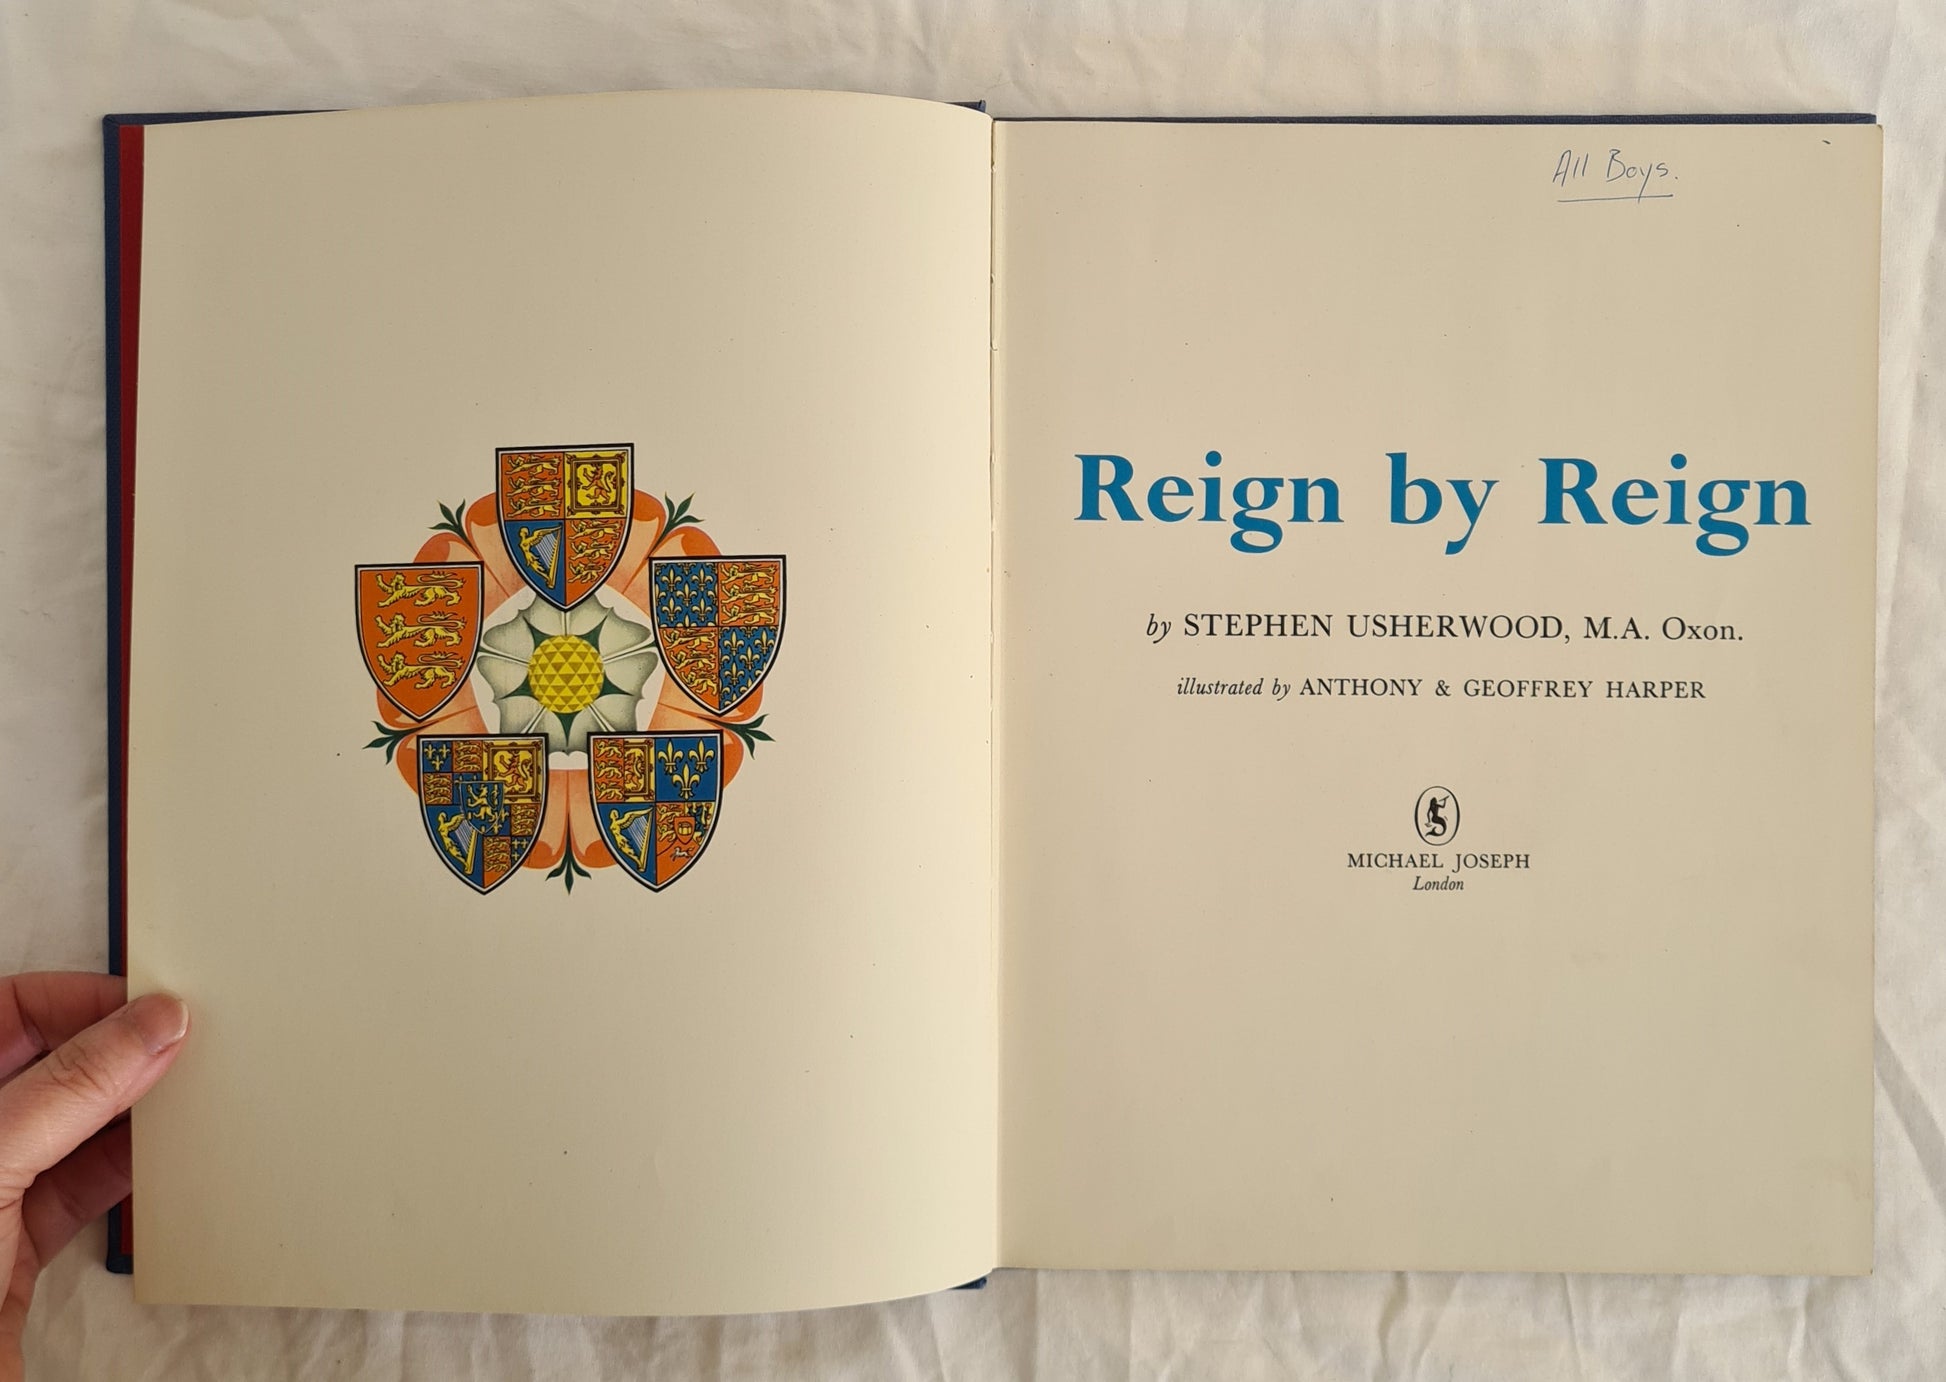 Reign by Reign  by Stephen Usherwood  illustrated by Anthony and Geoffrey Harper